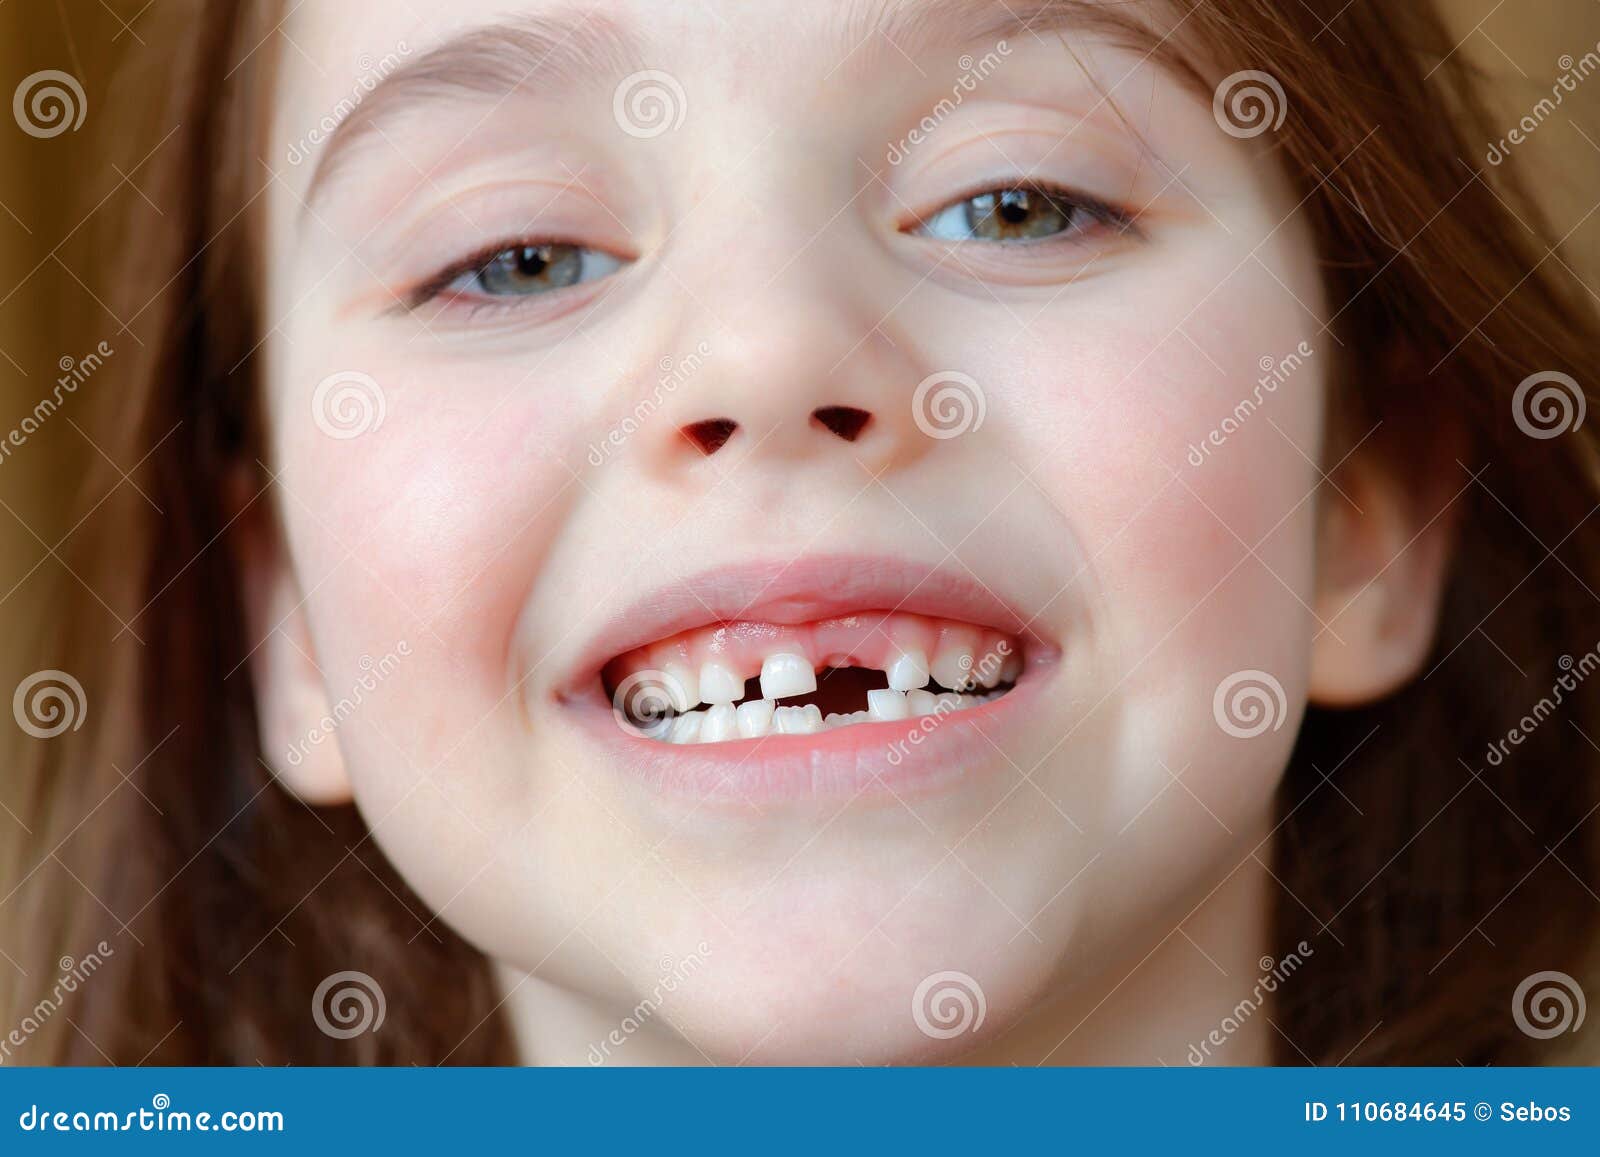 the adorable girl smiles with the fall of the first baby teeth.